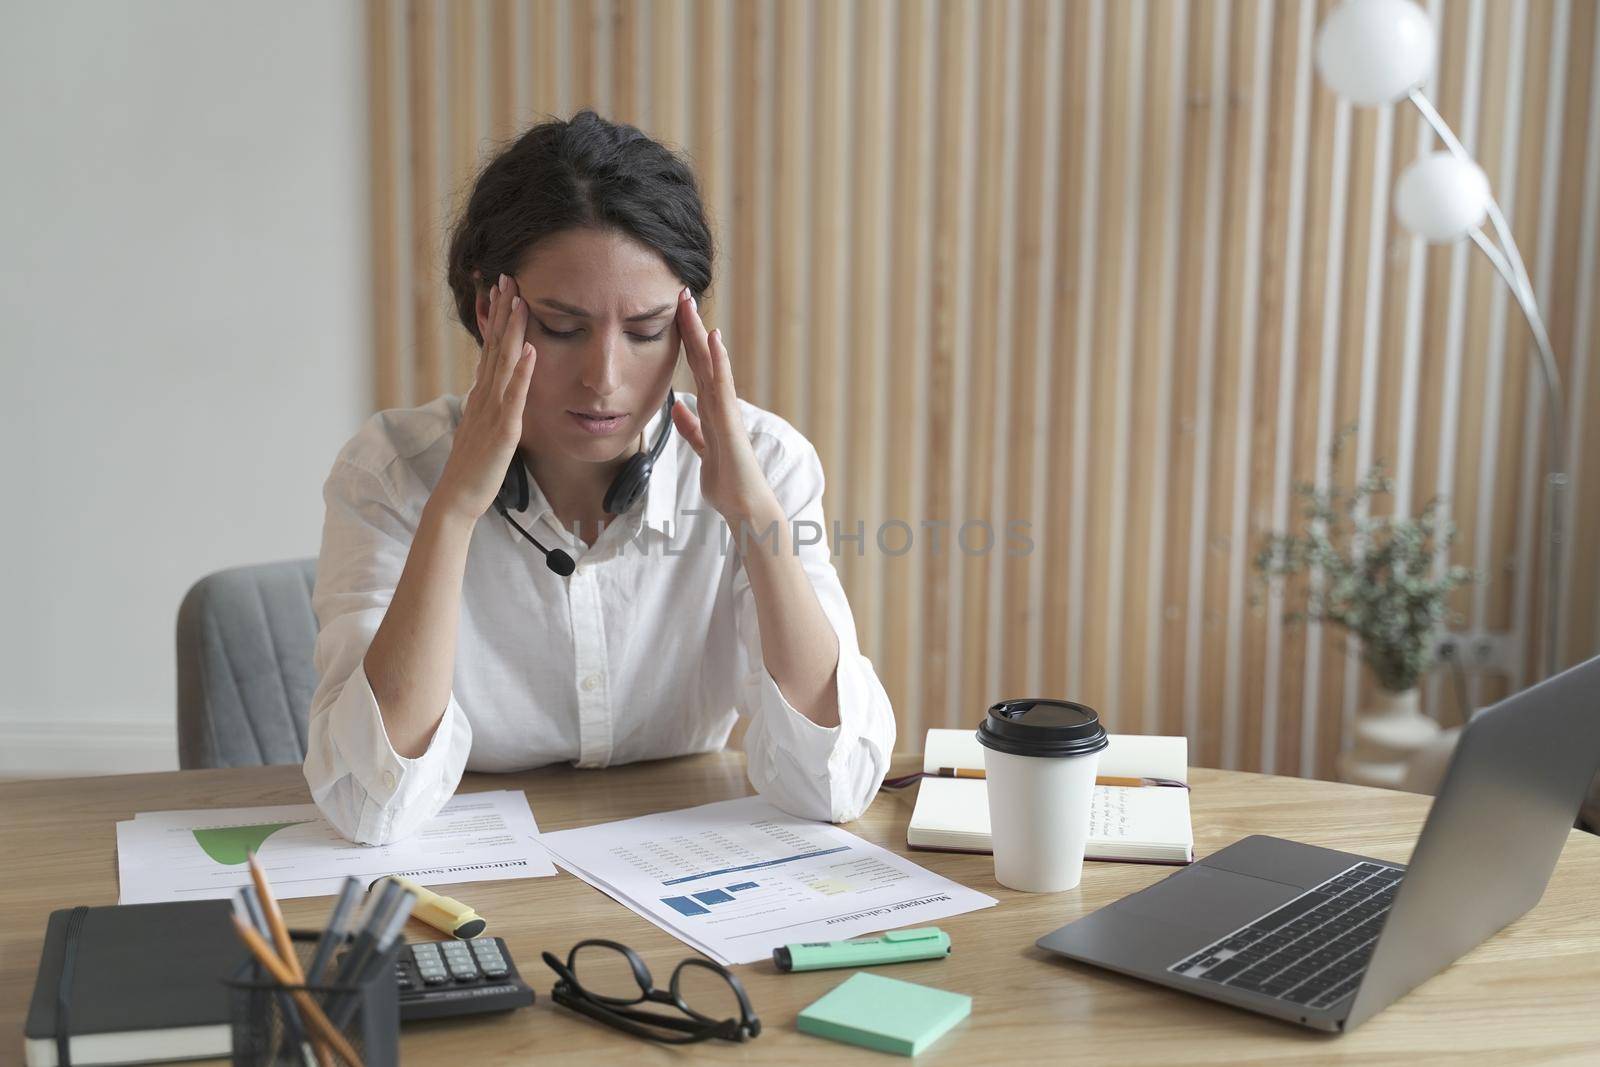 Young frustrated upset italian woman holding head in hands suffering from headache after hard working day, overworked sad business woman with closed eyes sitting at table with laptop and documents